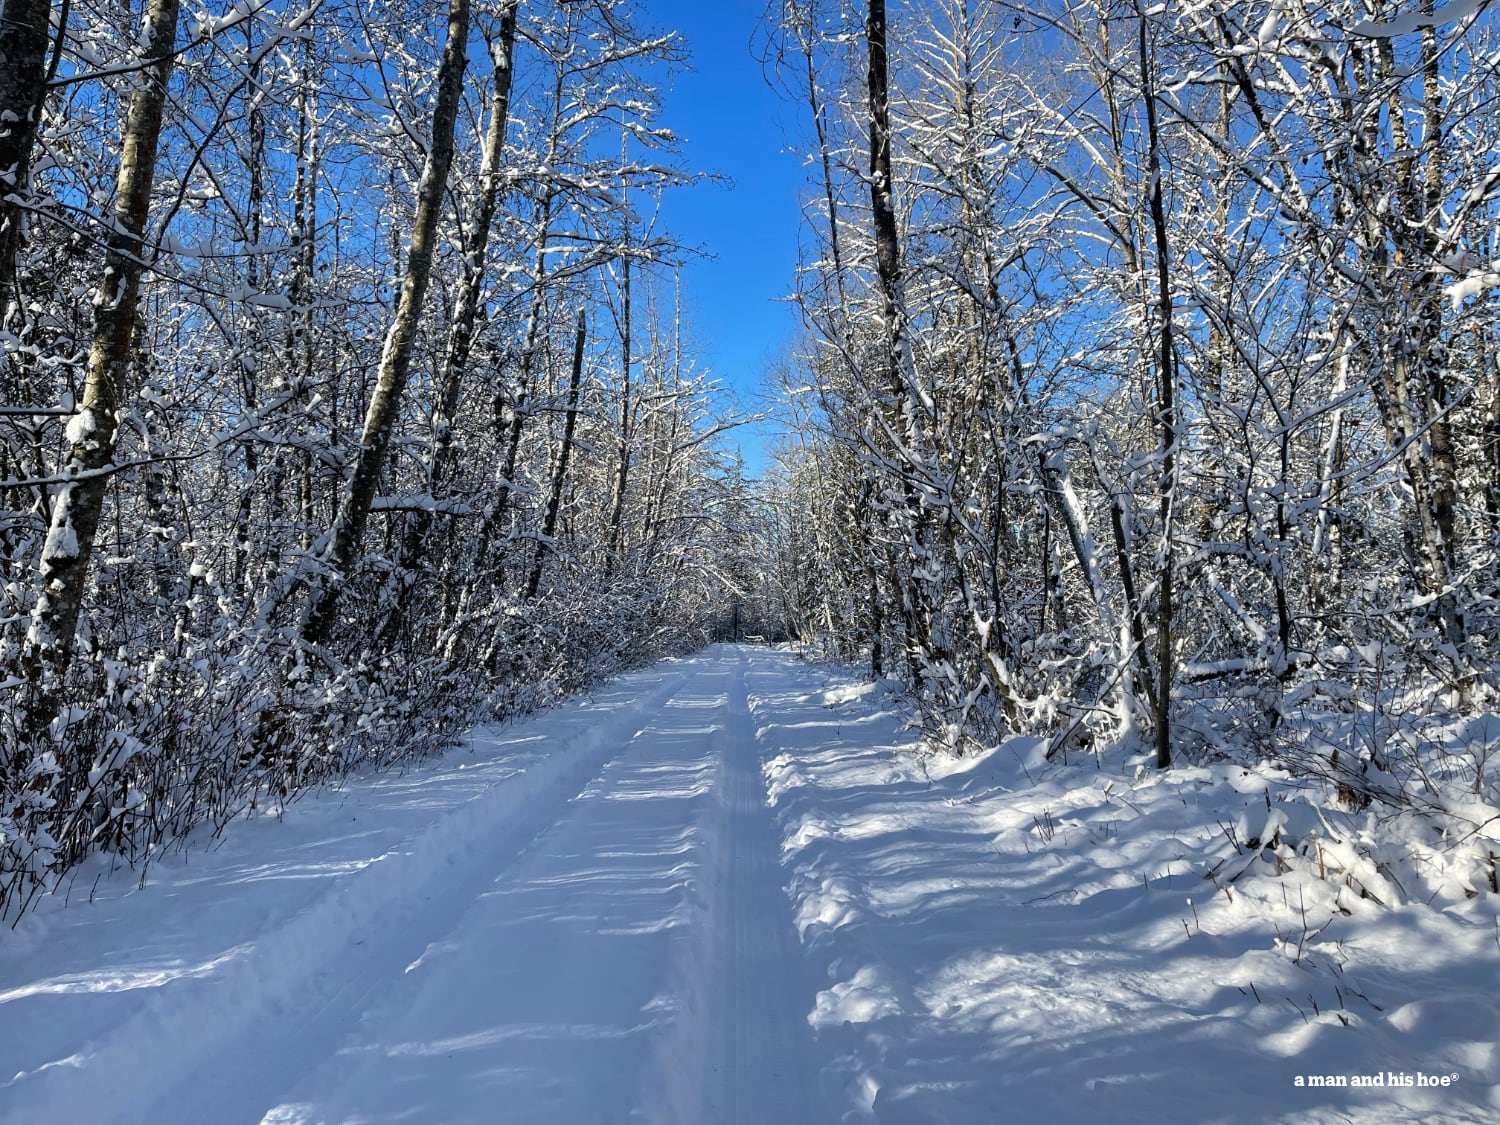 Snowy lane on the coldest, shortest, whitest, bluest day of the year.